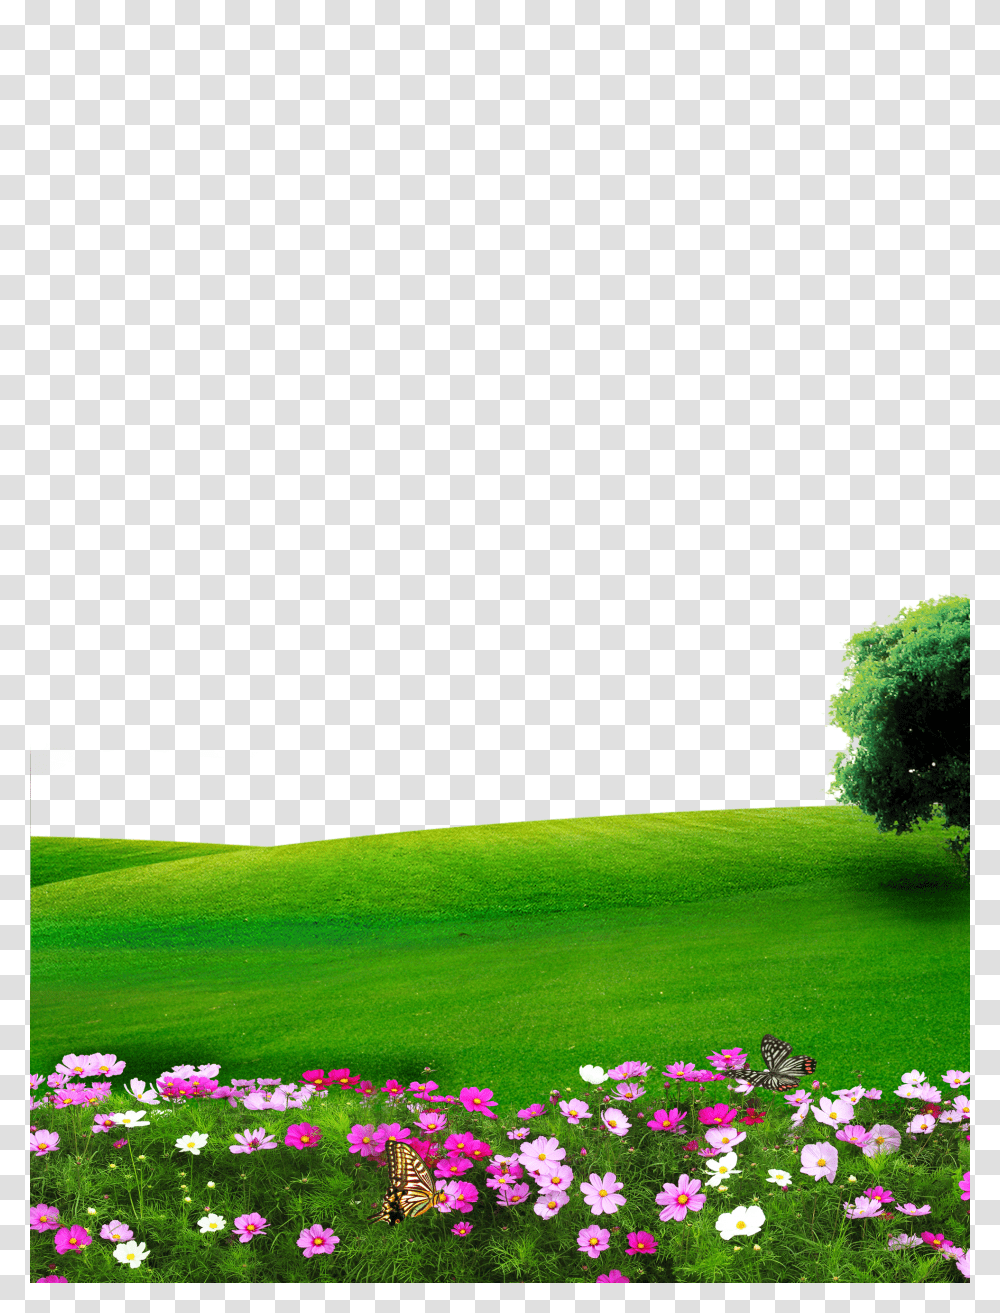 Popular And Trending Grass Field Stickers, Plant, Lawn, Flower, Blossom Transparent Png